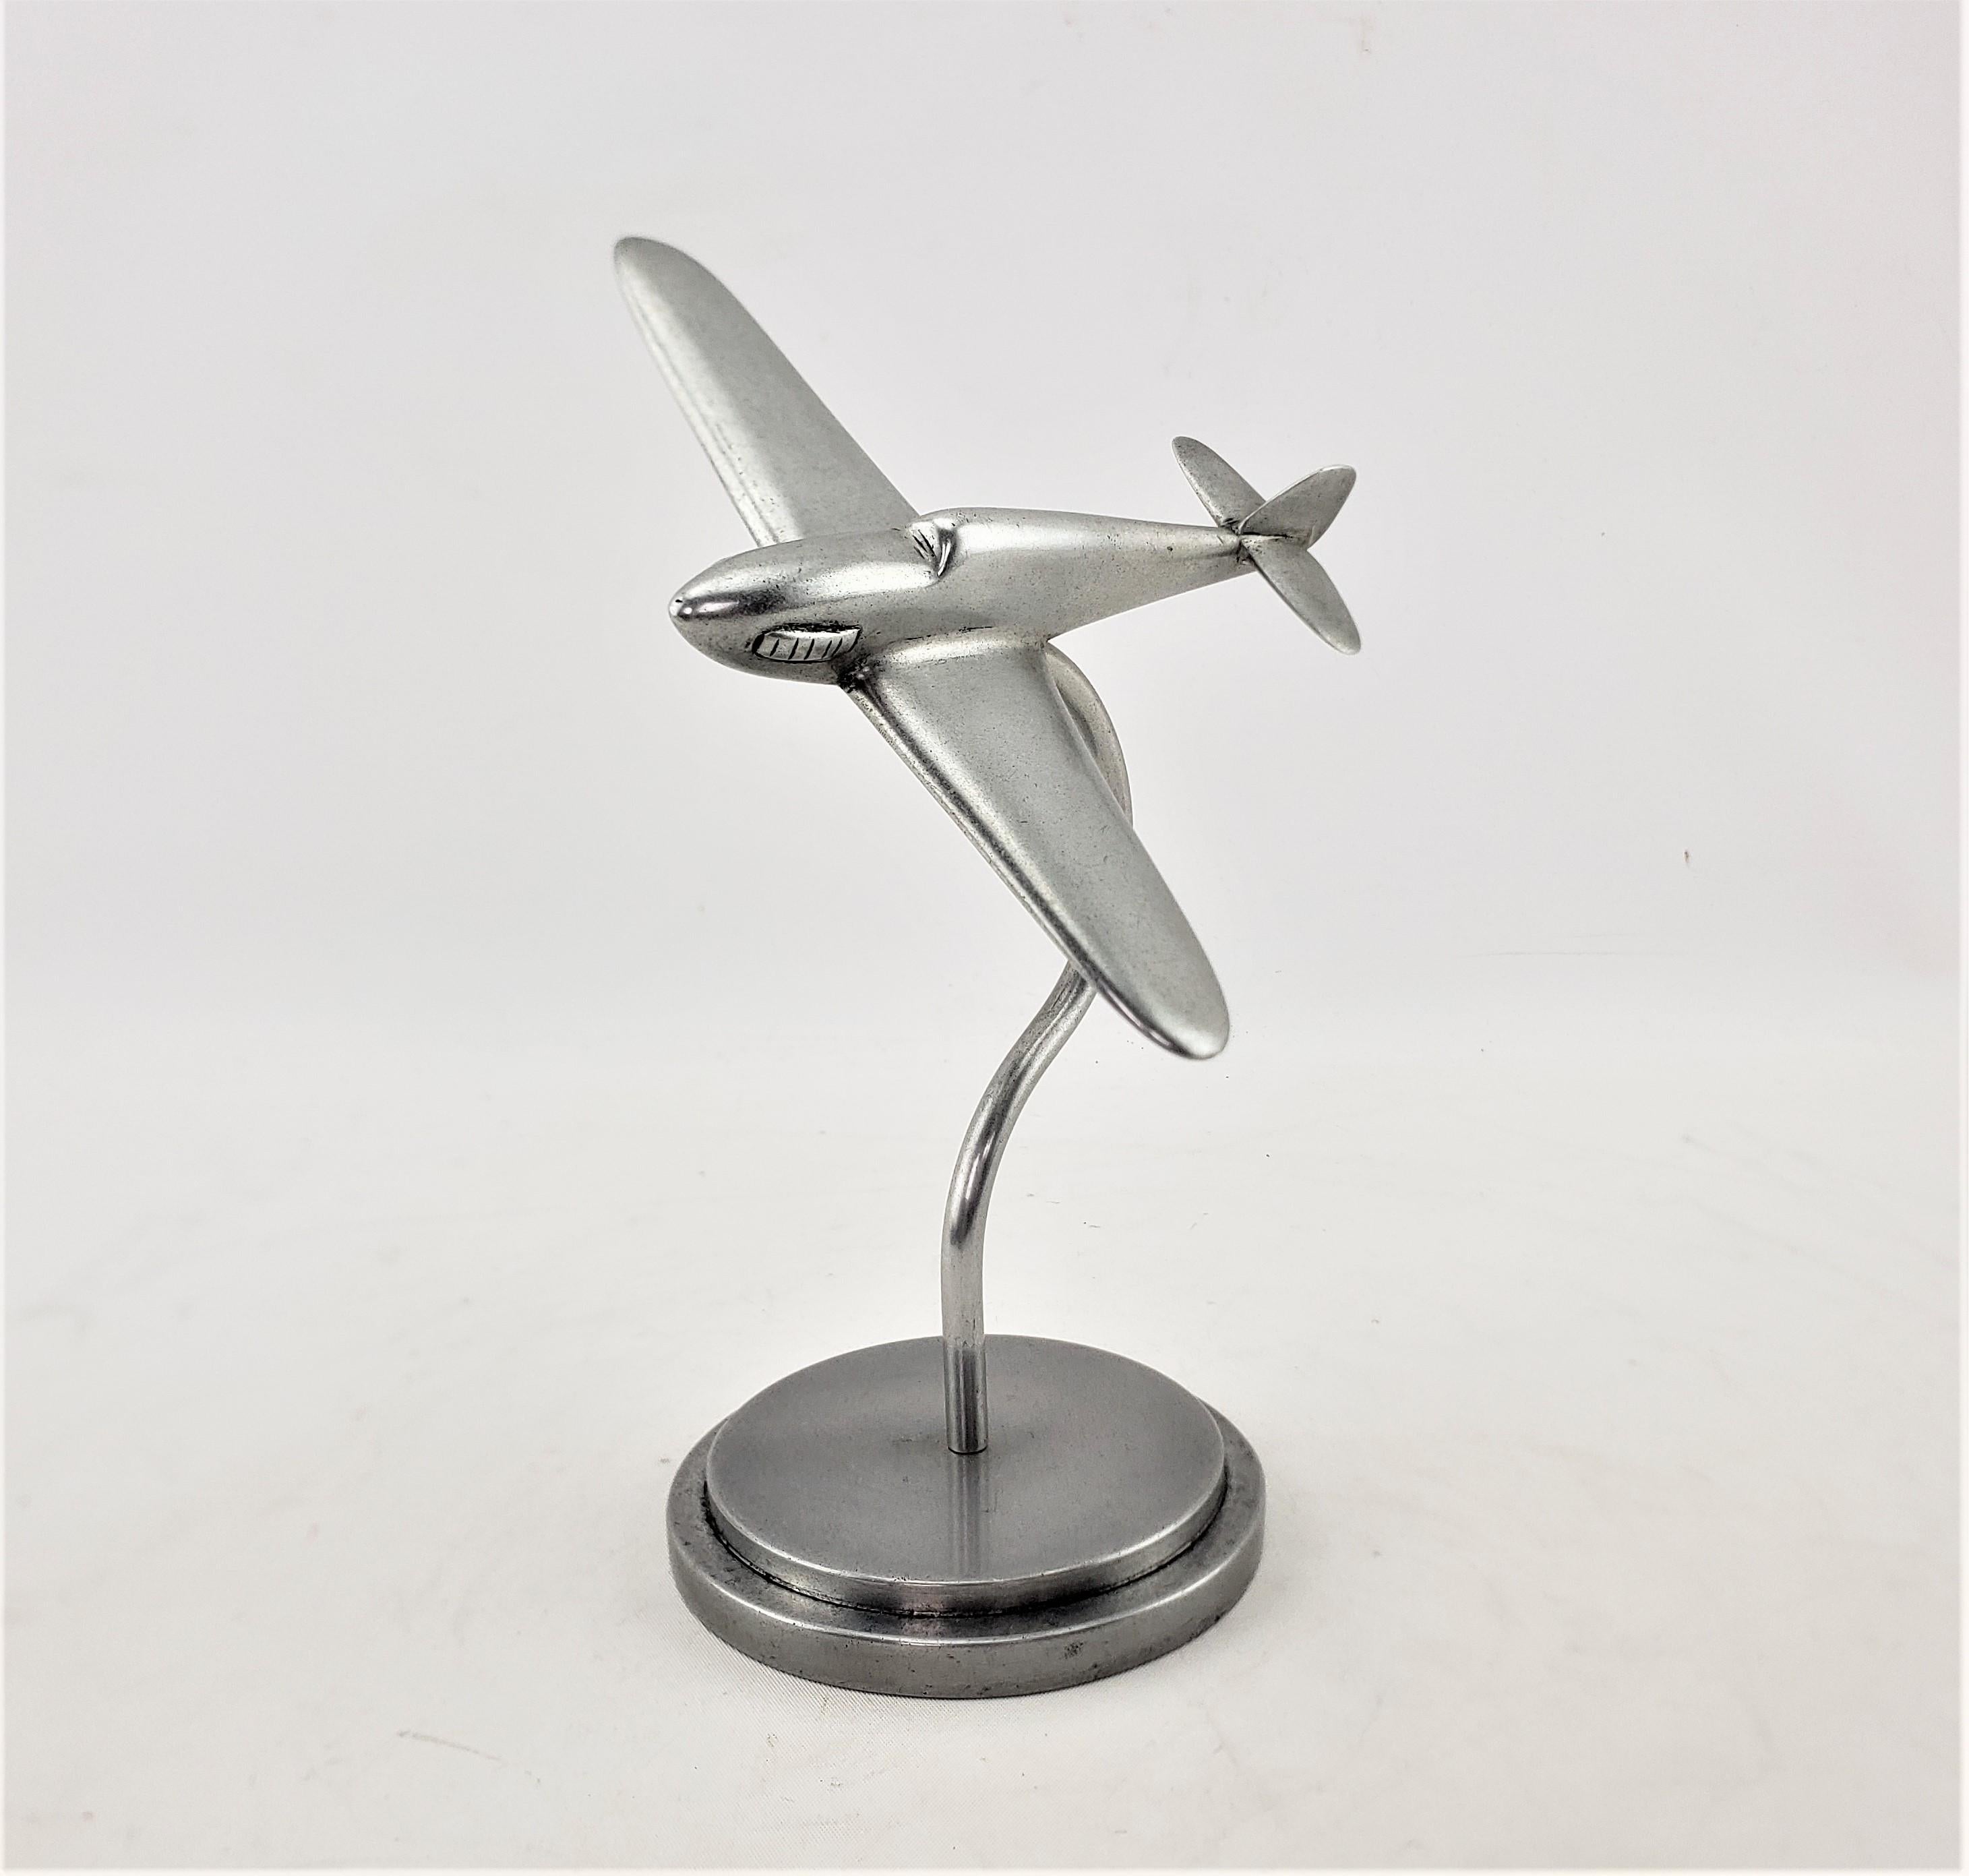 This airplane model or sculpture is unsigned, but presumed to have originated from the United States and dating to approximately 1920 and done in the period streamlined Art Deco style. The plane is composed of cast and brushed aluminum and is some